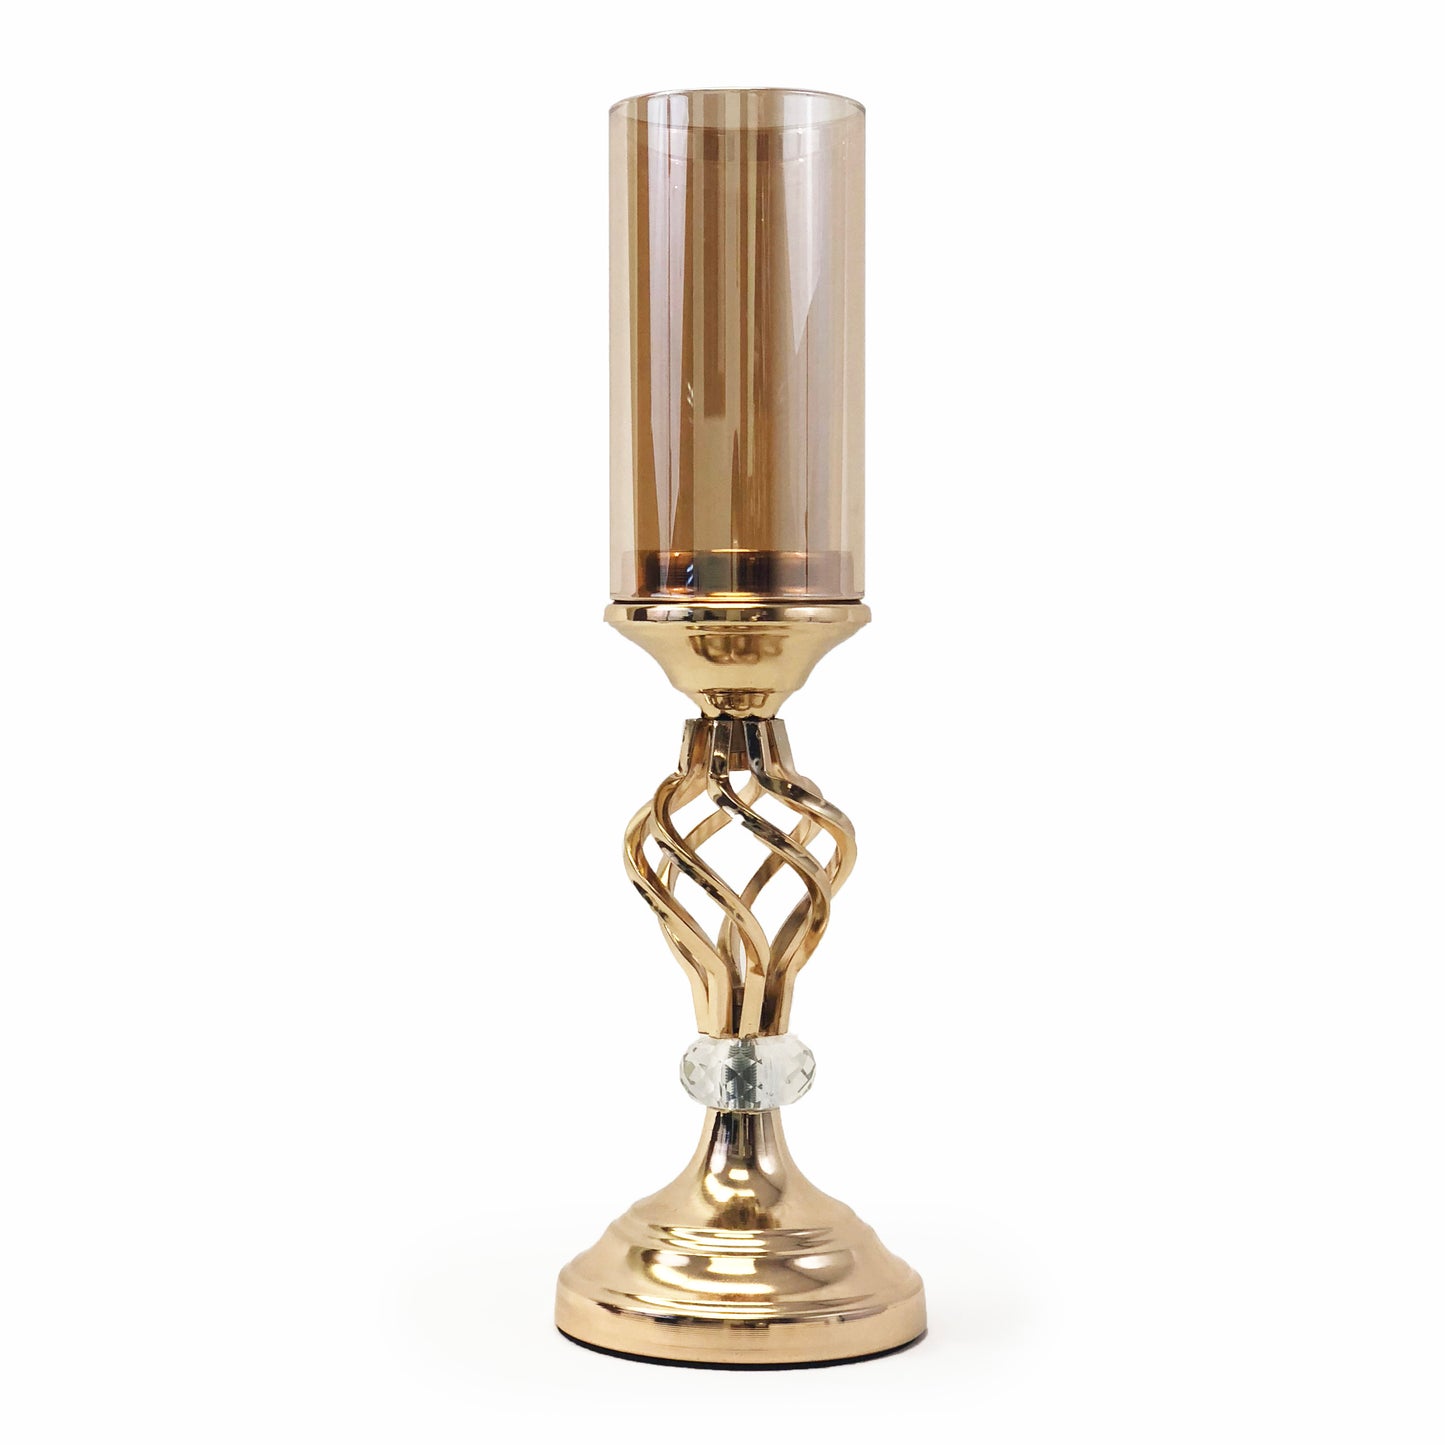 allgala 14.5" Crystal Gold Plated Tealight Votive Decorative Candle Holder with Hurrican Cover …